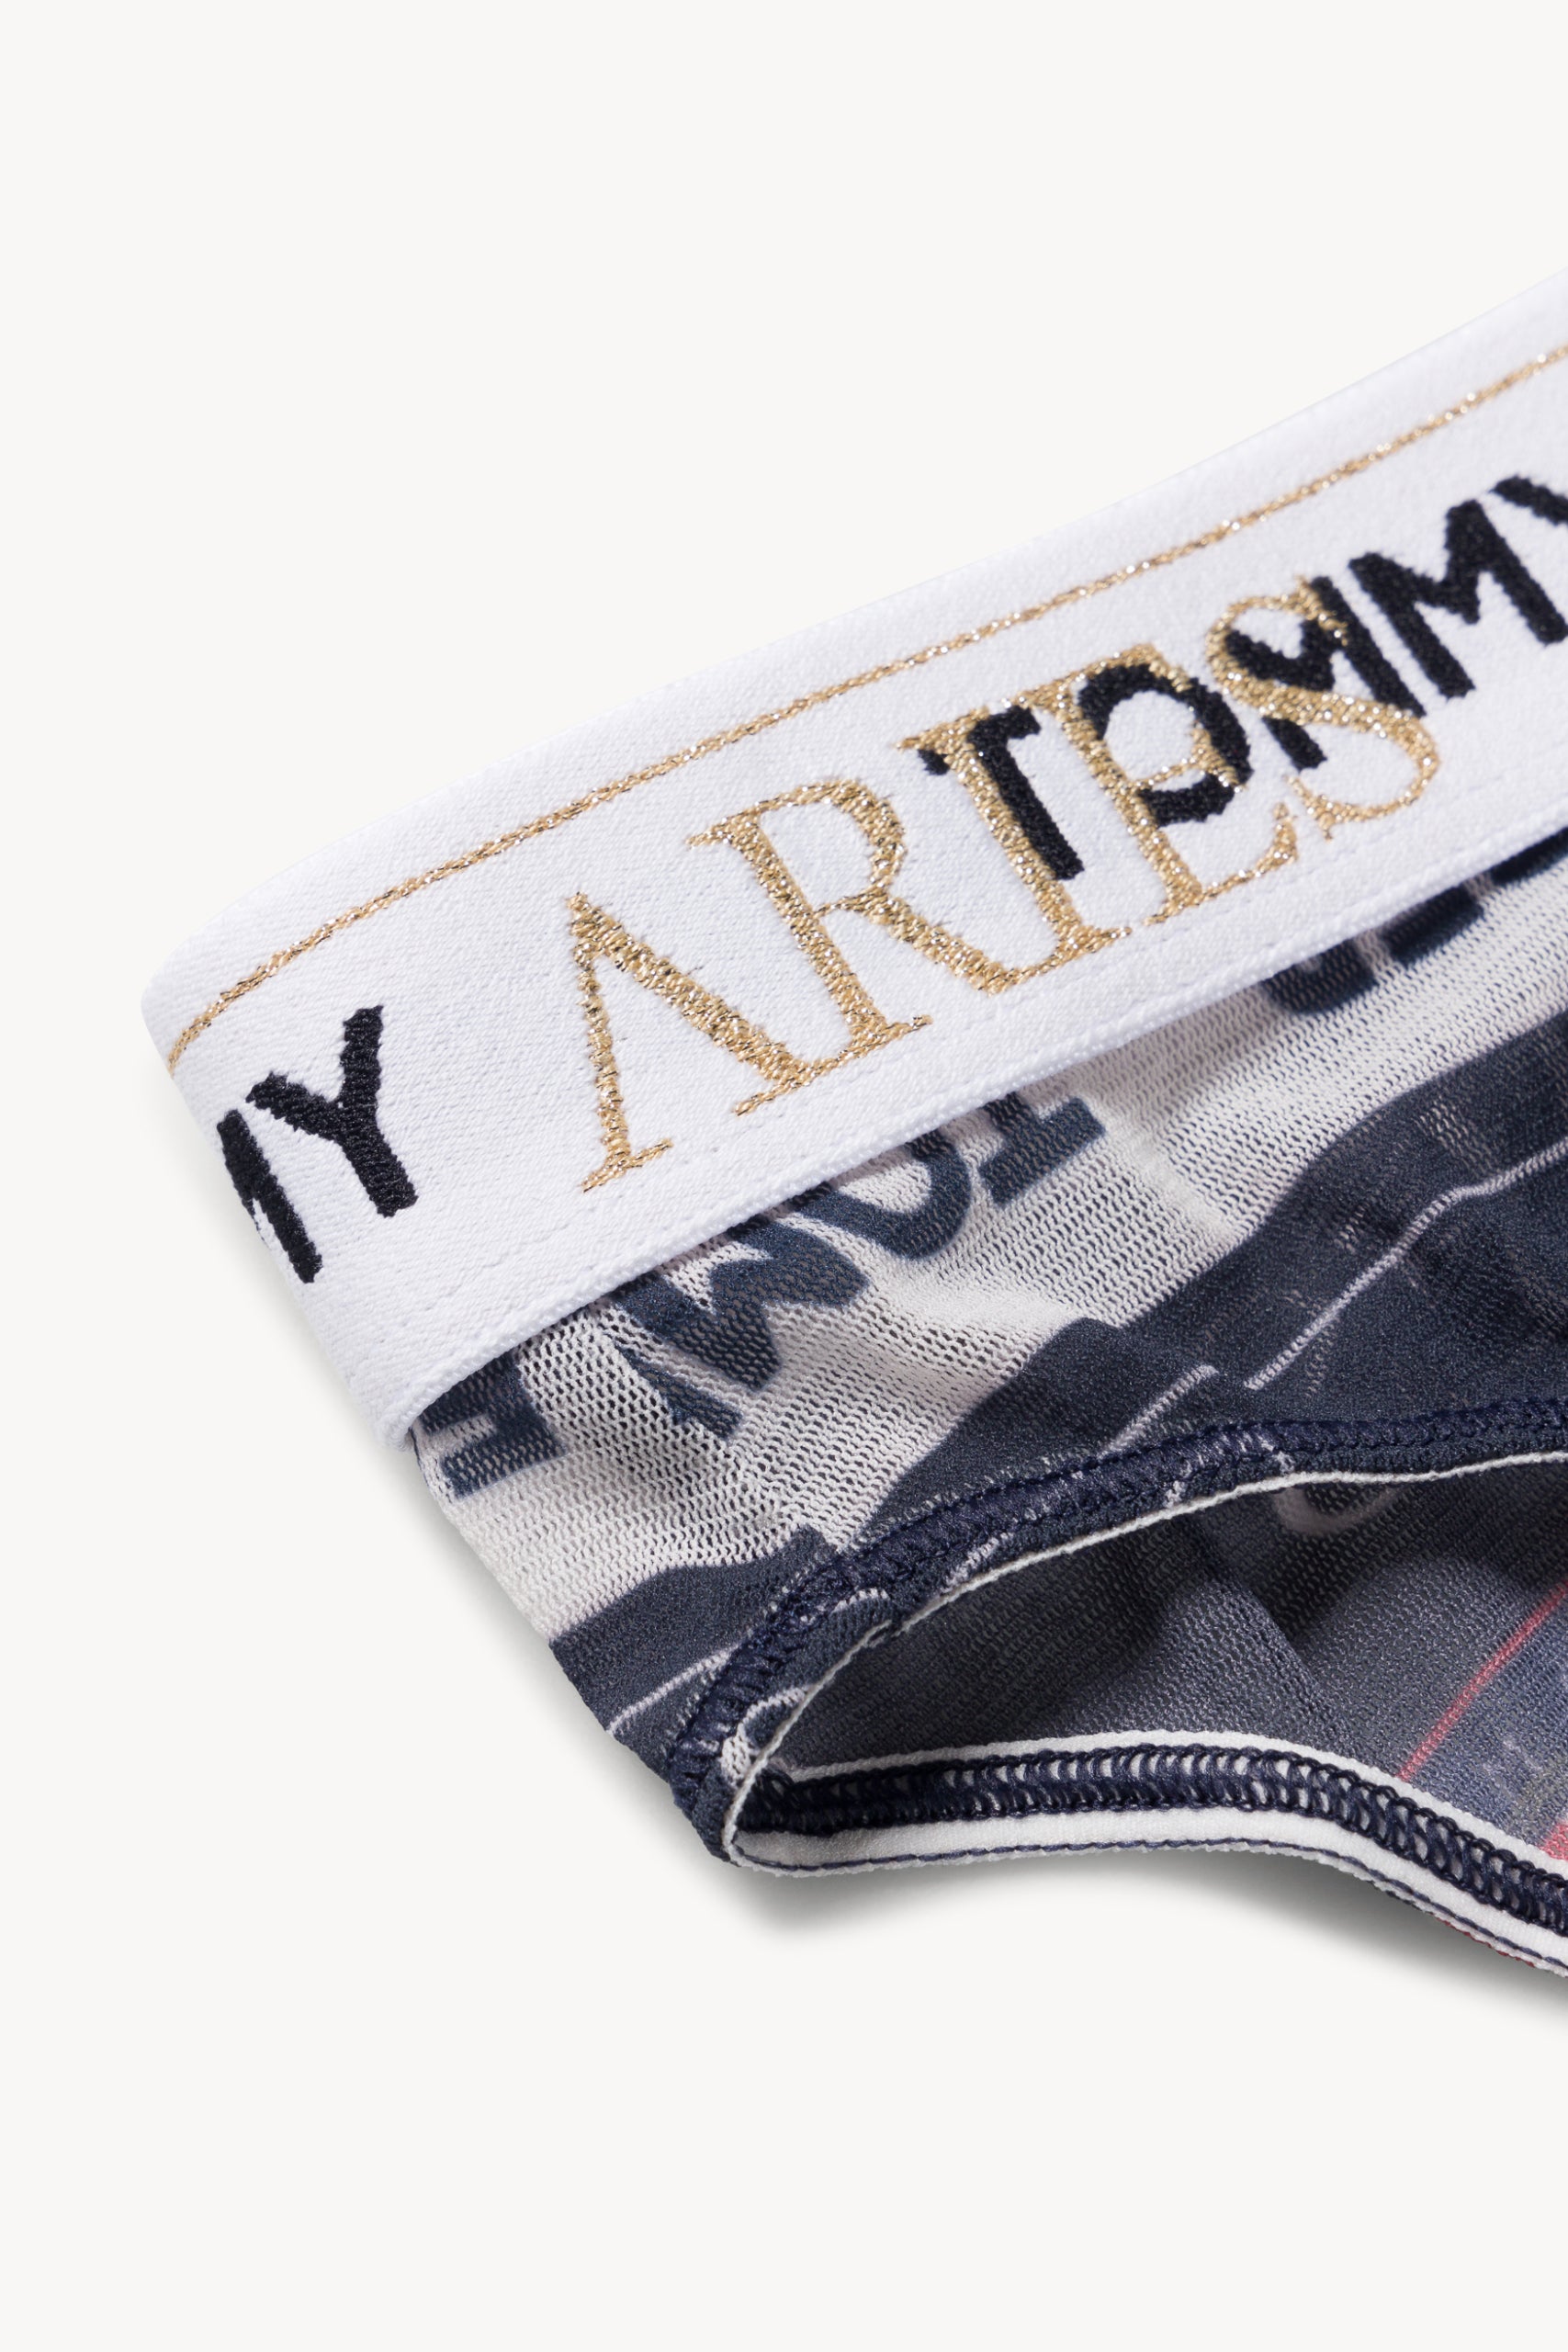 Load image into Gallery viewer, Tommy x Aries Logo Sheer Mid Rise Briefs